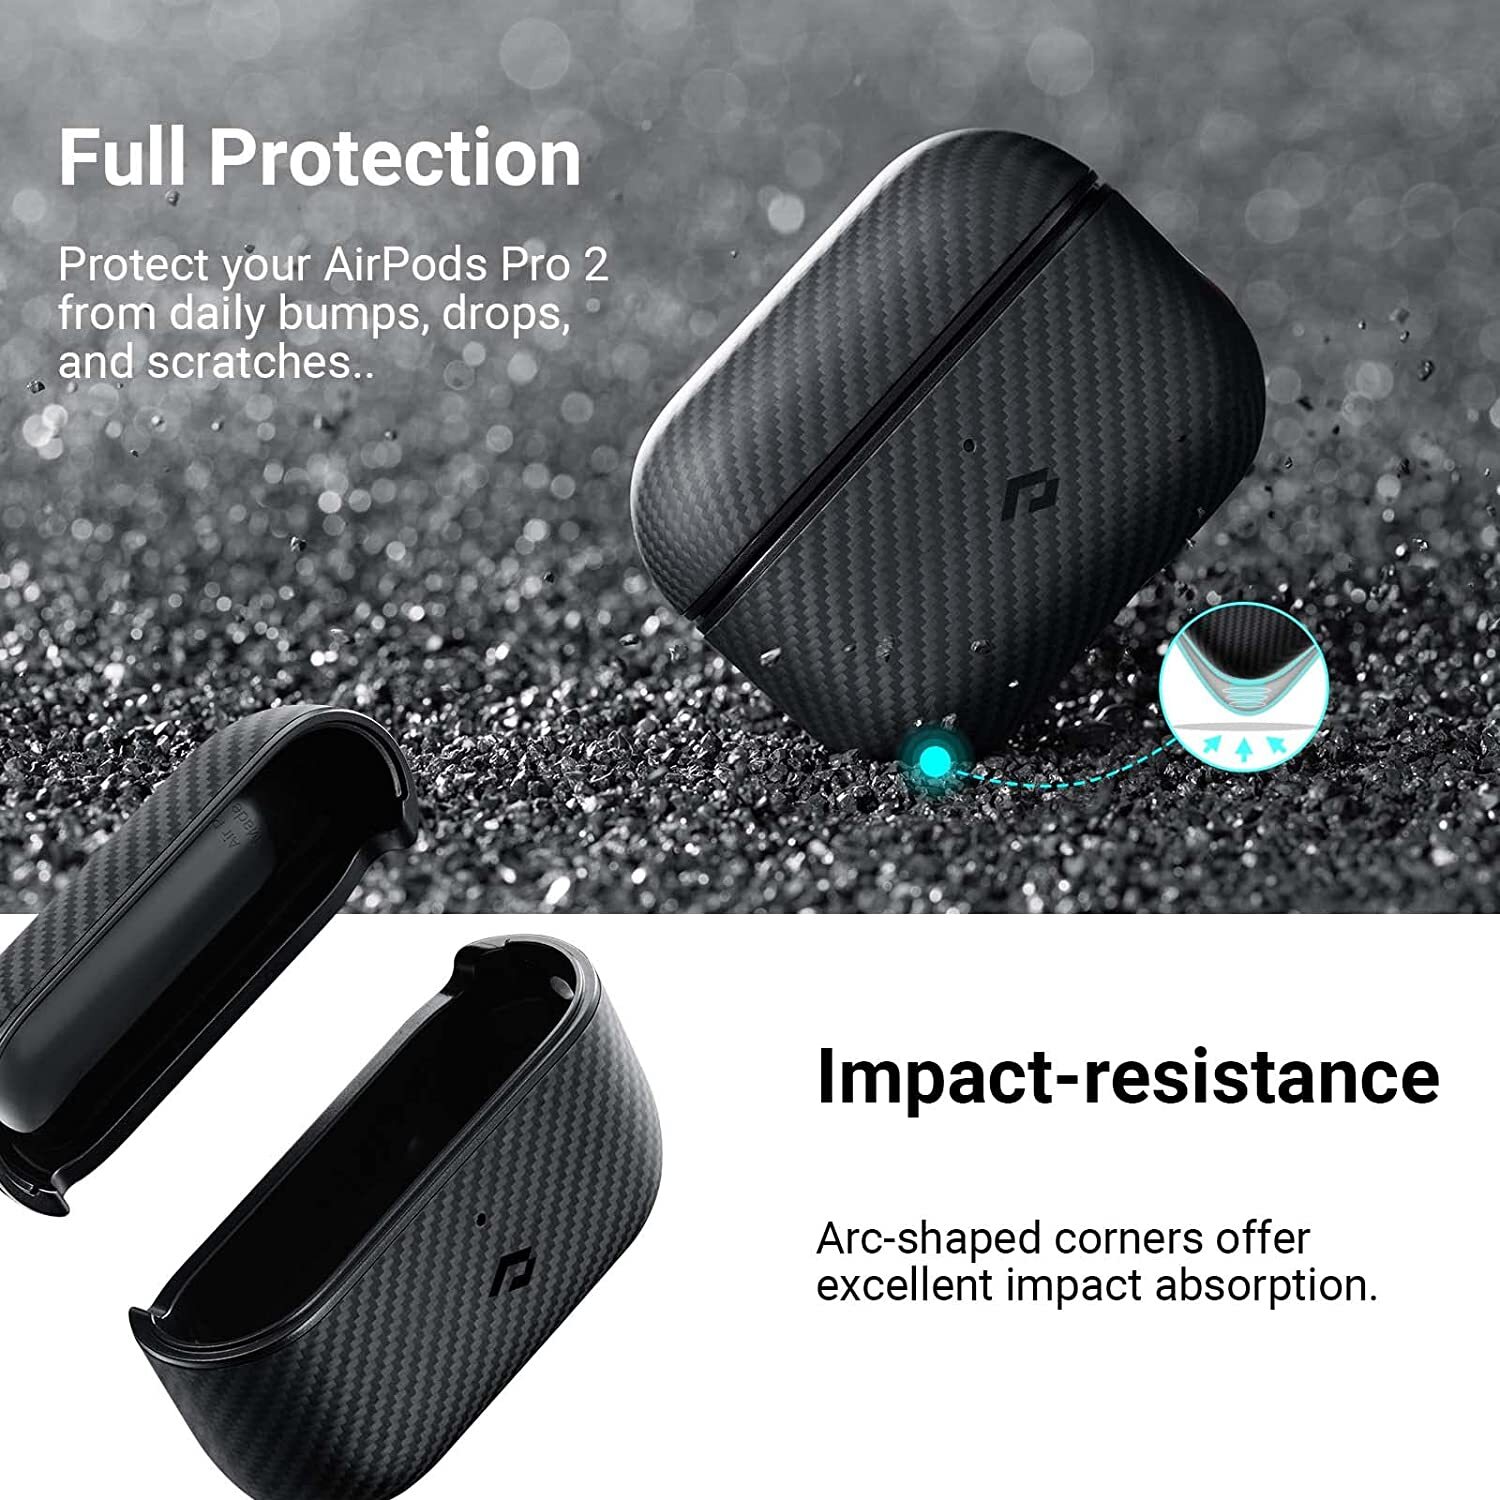 Pitaka Magez Protective Case For Airpods Pro 2 -600D Black/Grey (Twill)